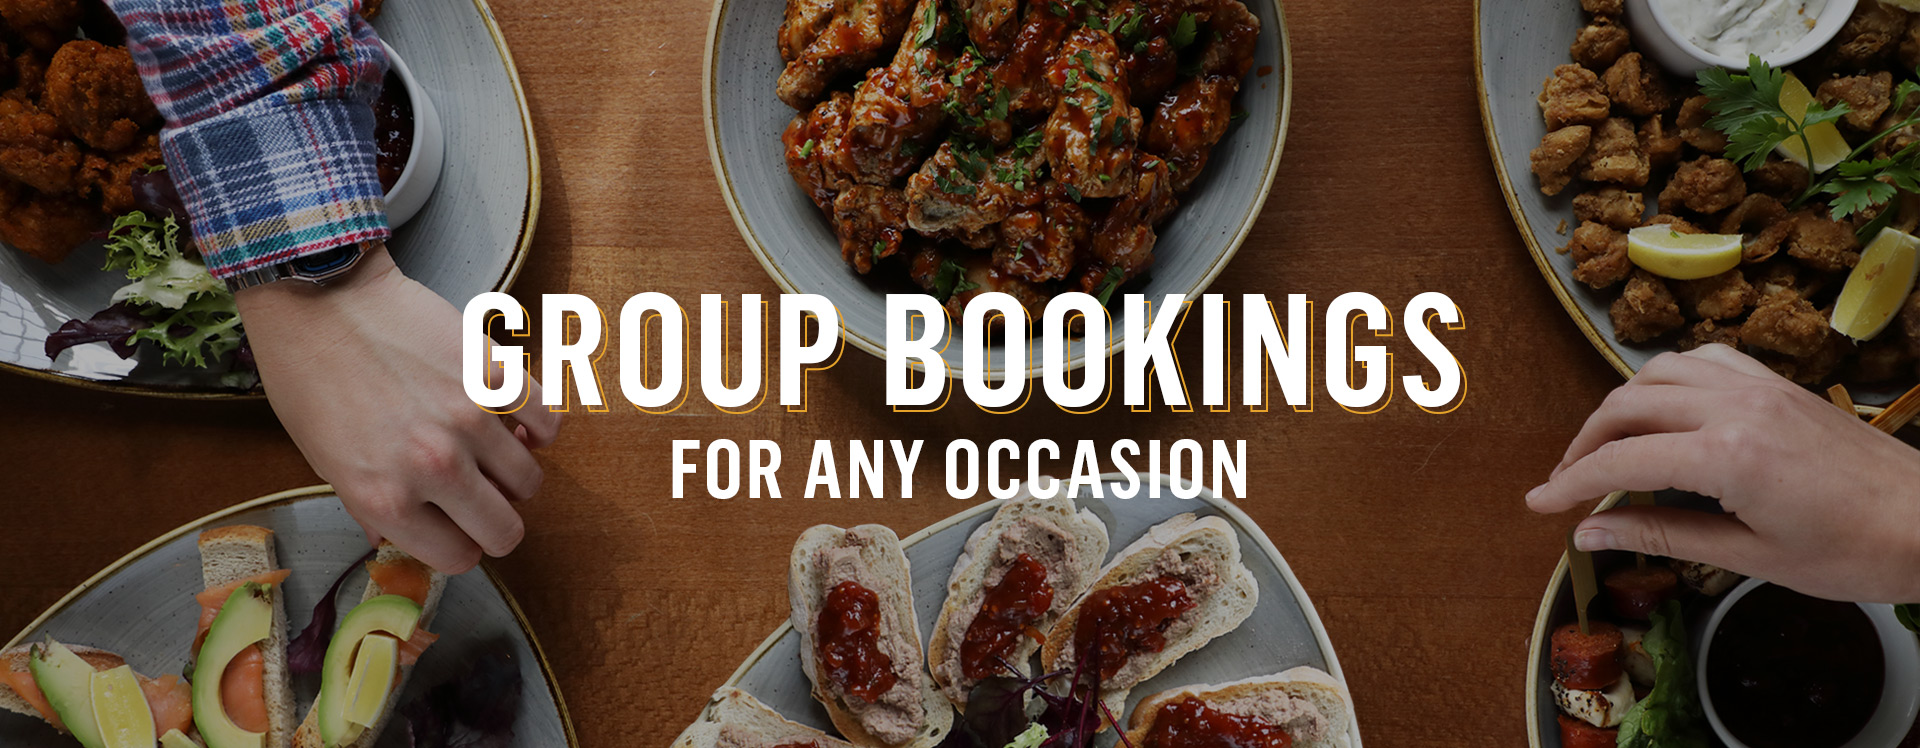 Group Bookings at The Mitre